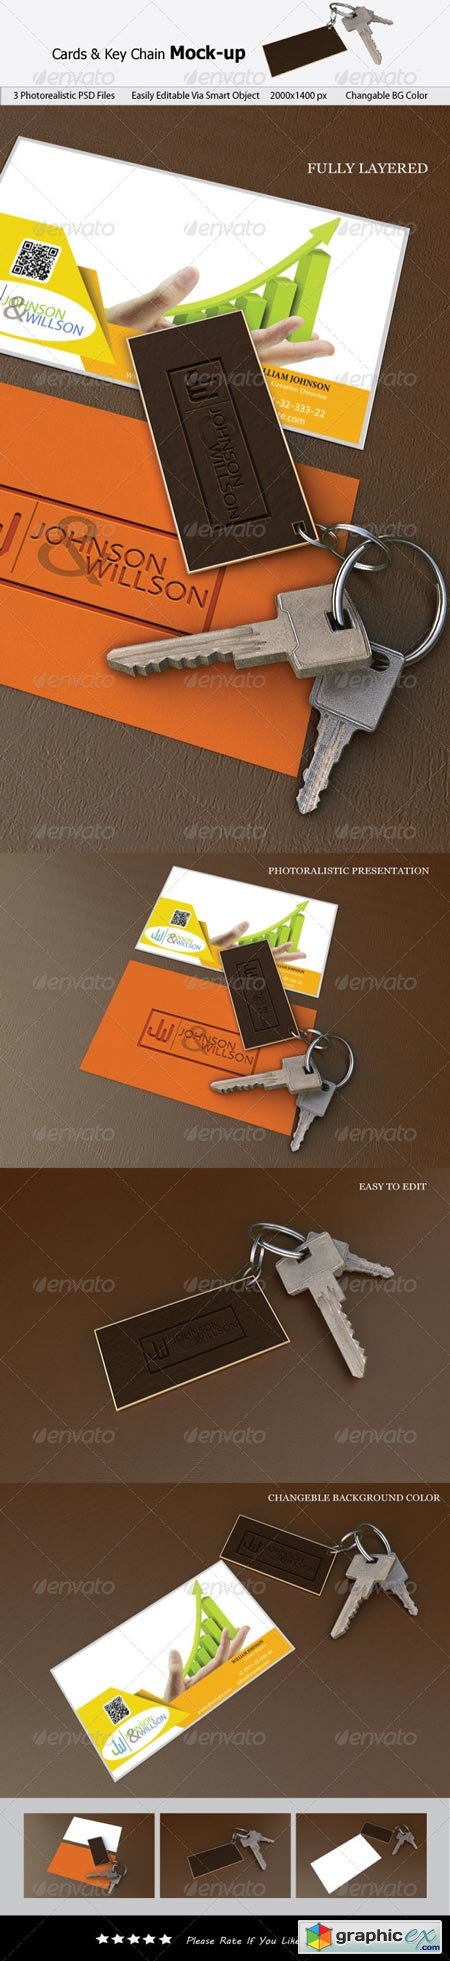 Cards & Key Chain Mock-up